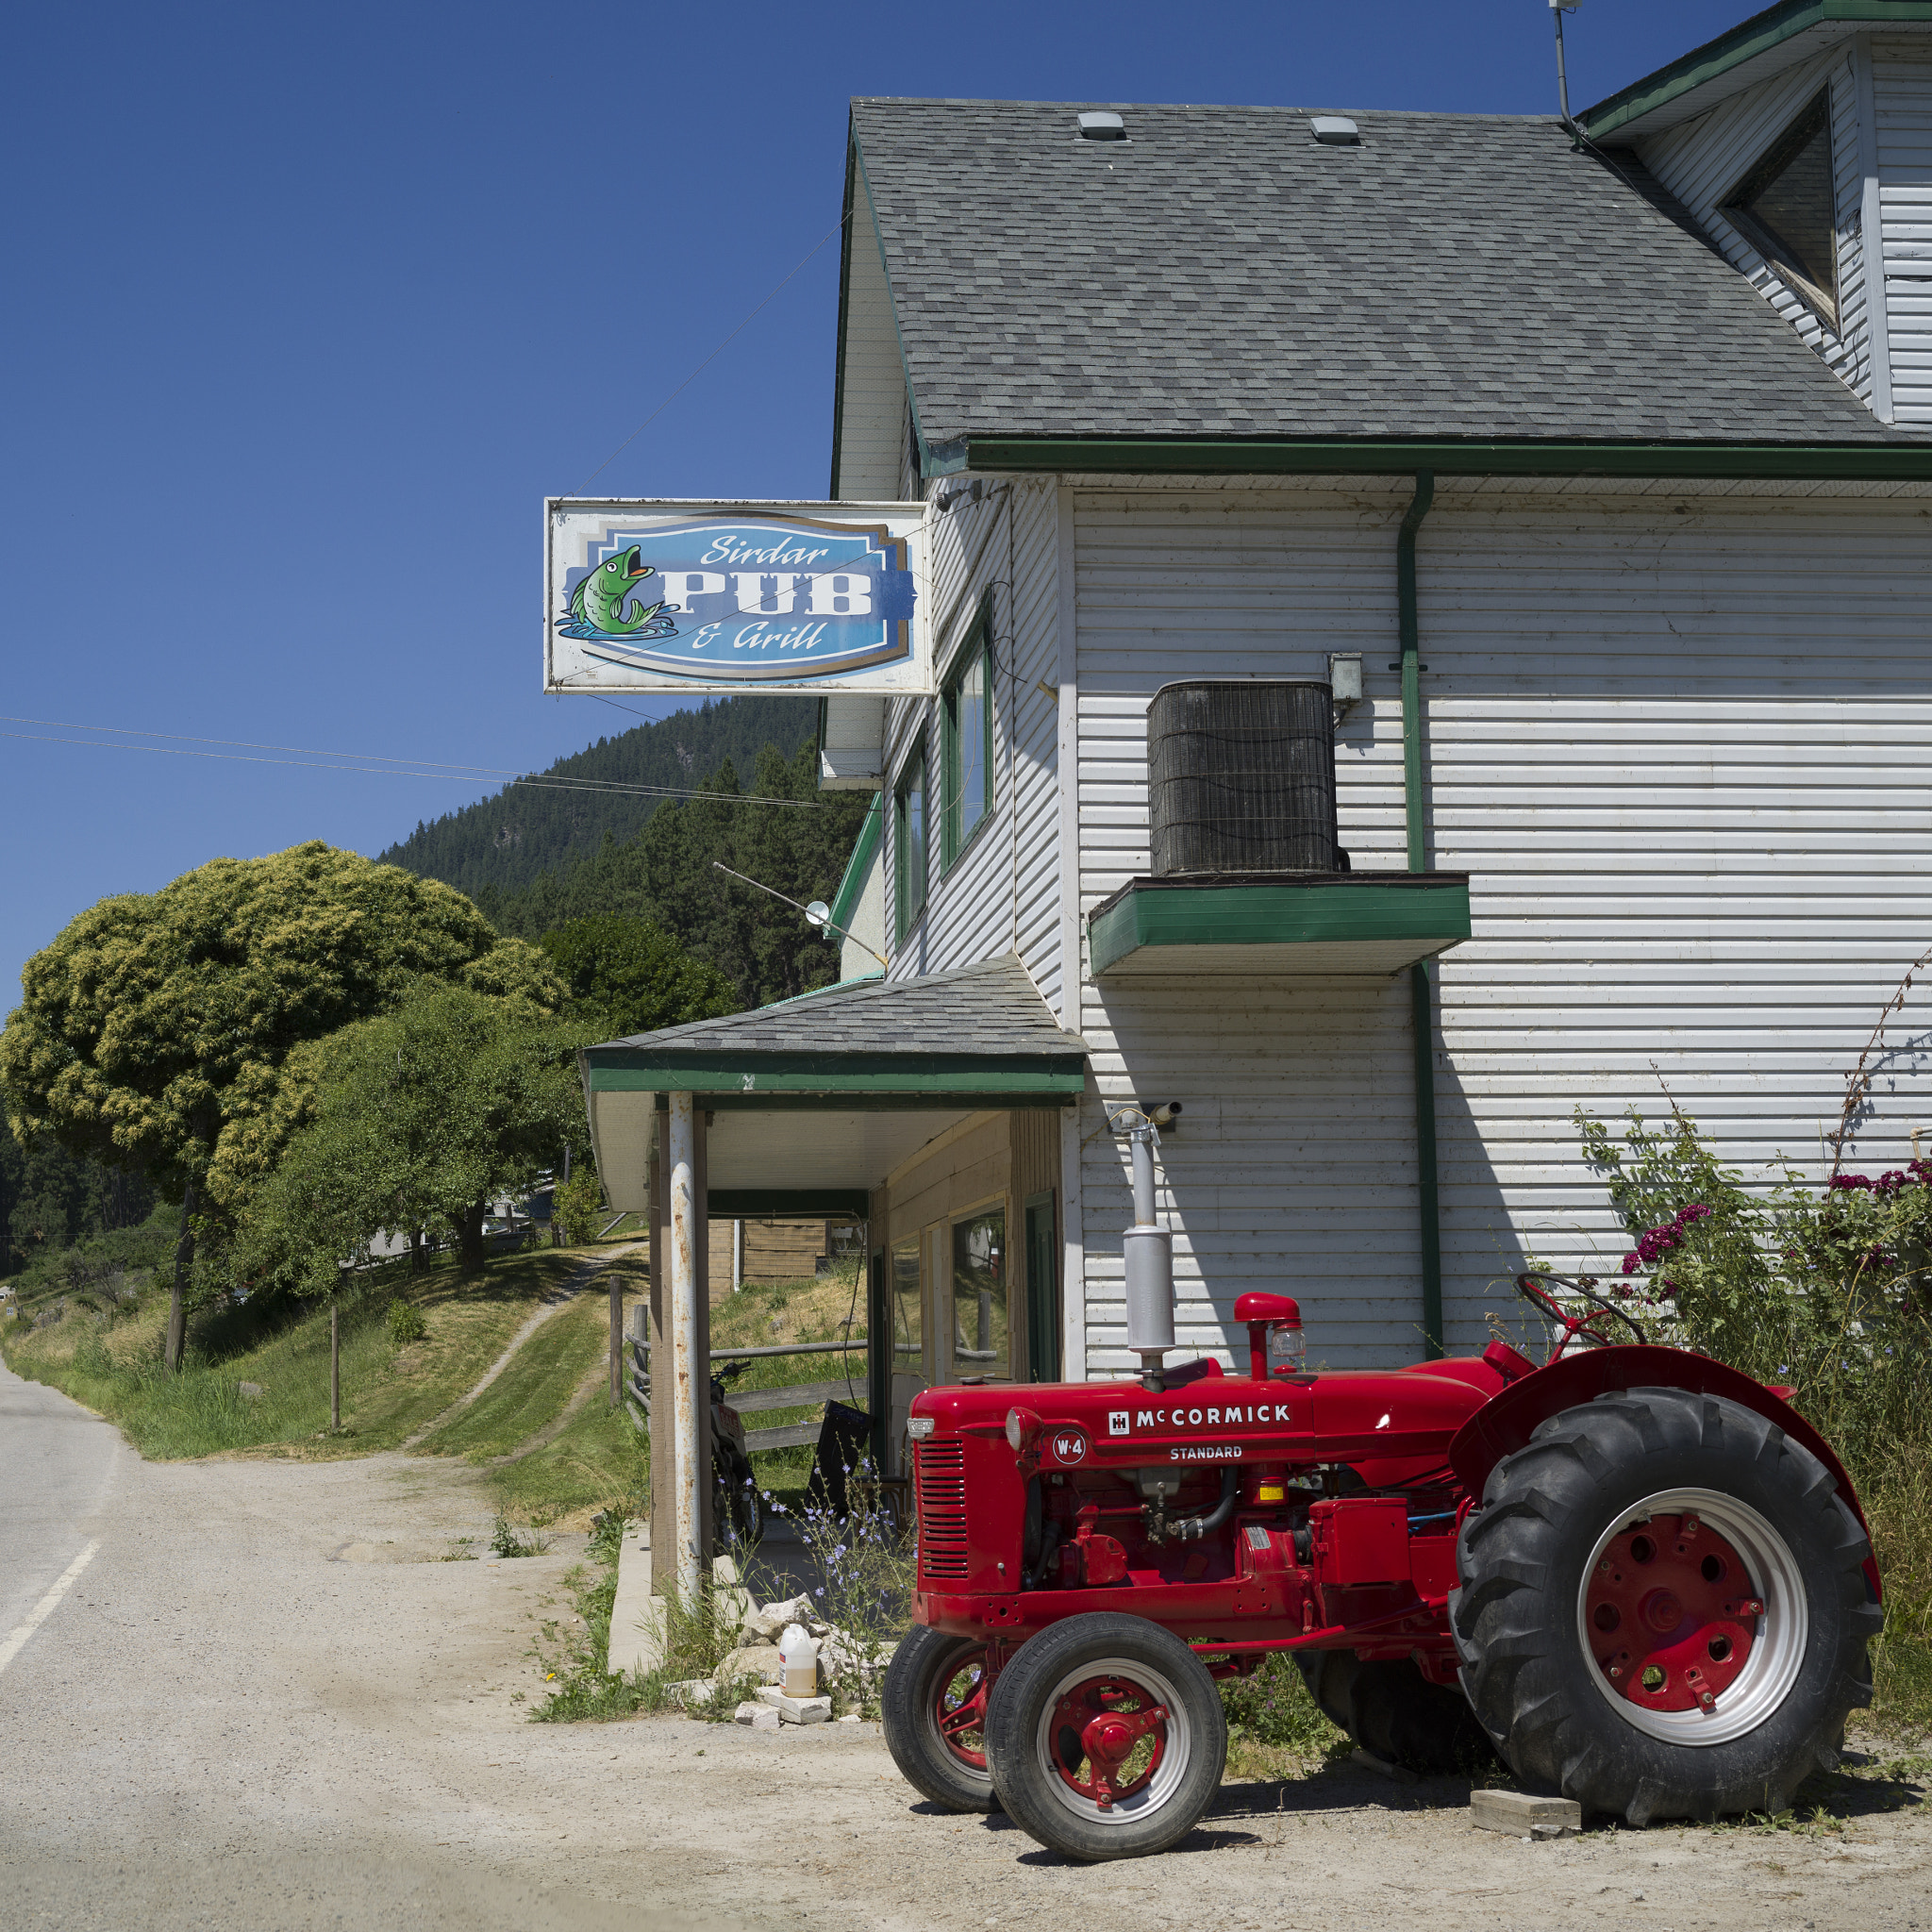 Hasselblad X1D-50c sample photo. Tractor parked next to a pub, sirdar, near creston, british colu photography